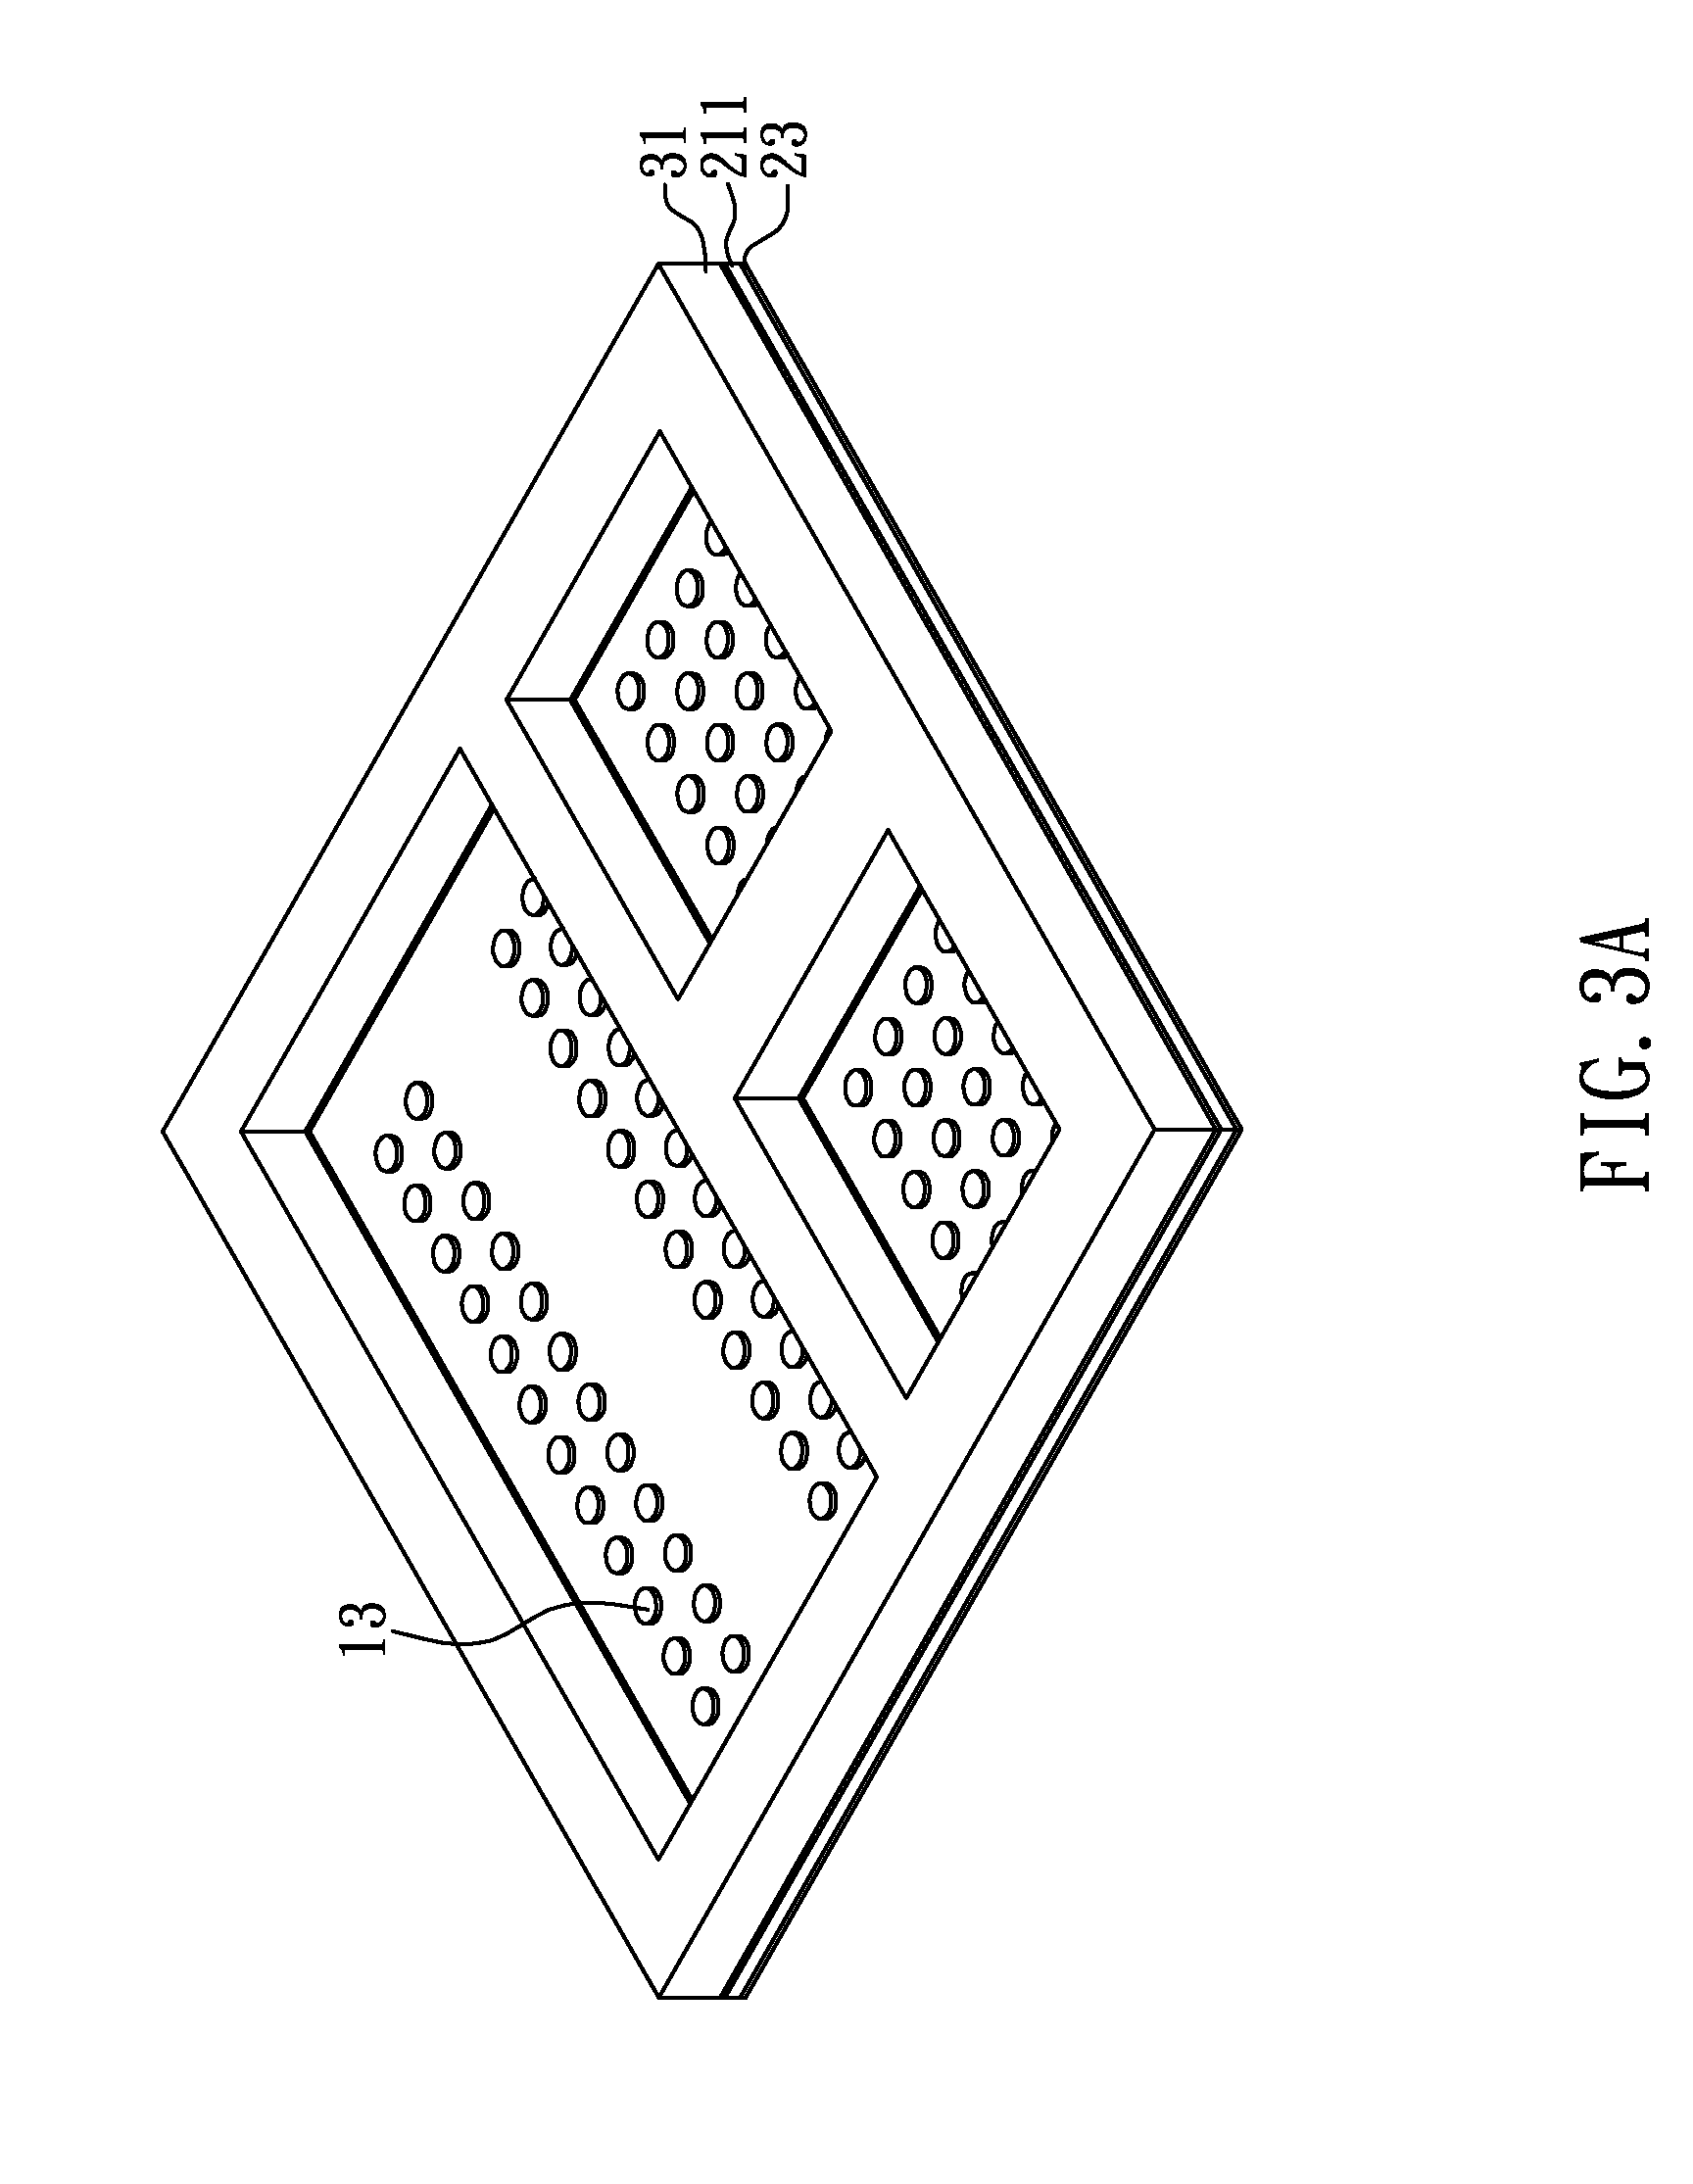 Multi-cavity wiring board for semiconductor assembly with internal electromagnetic shielding